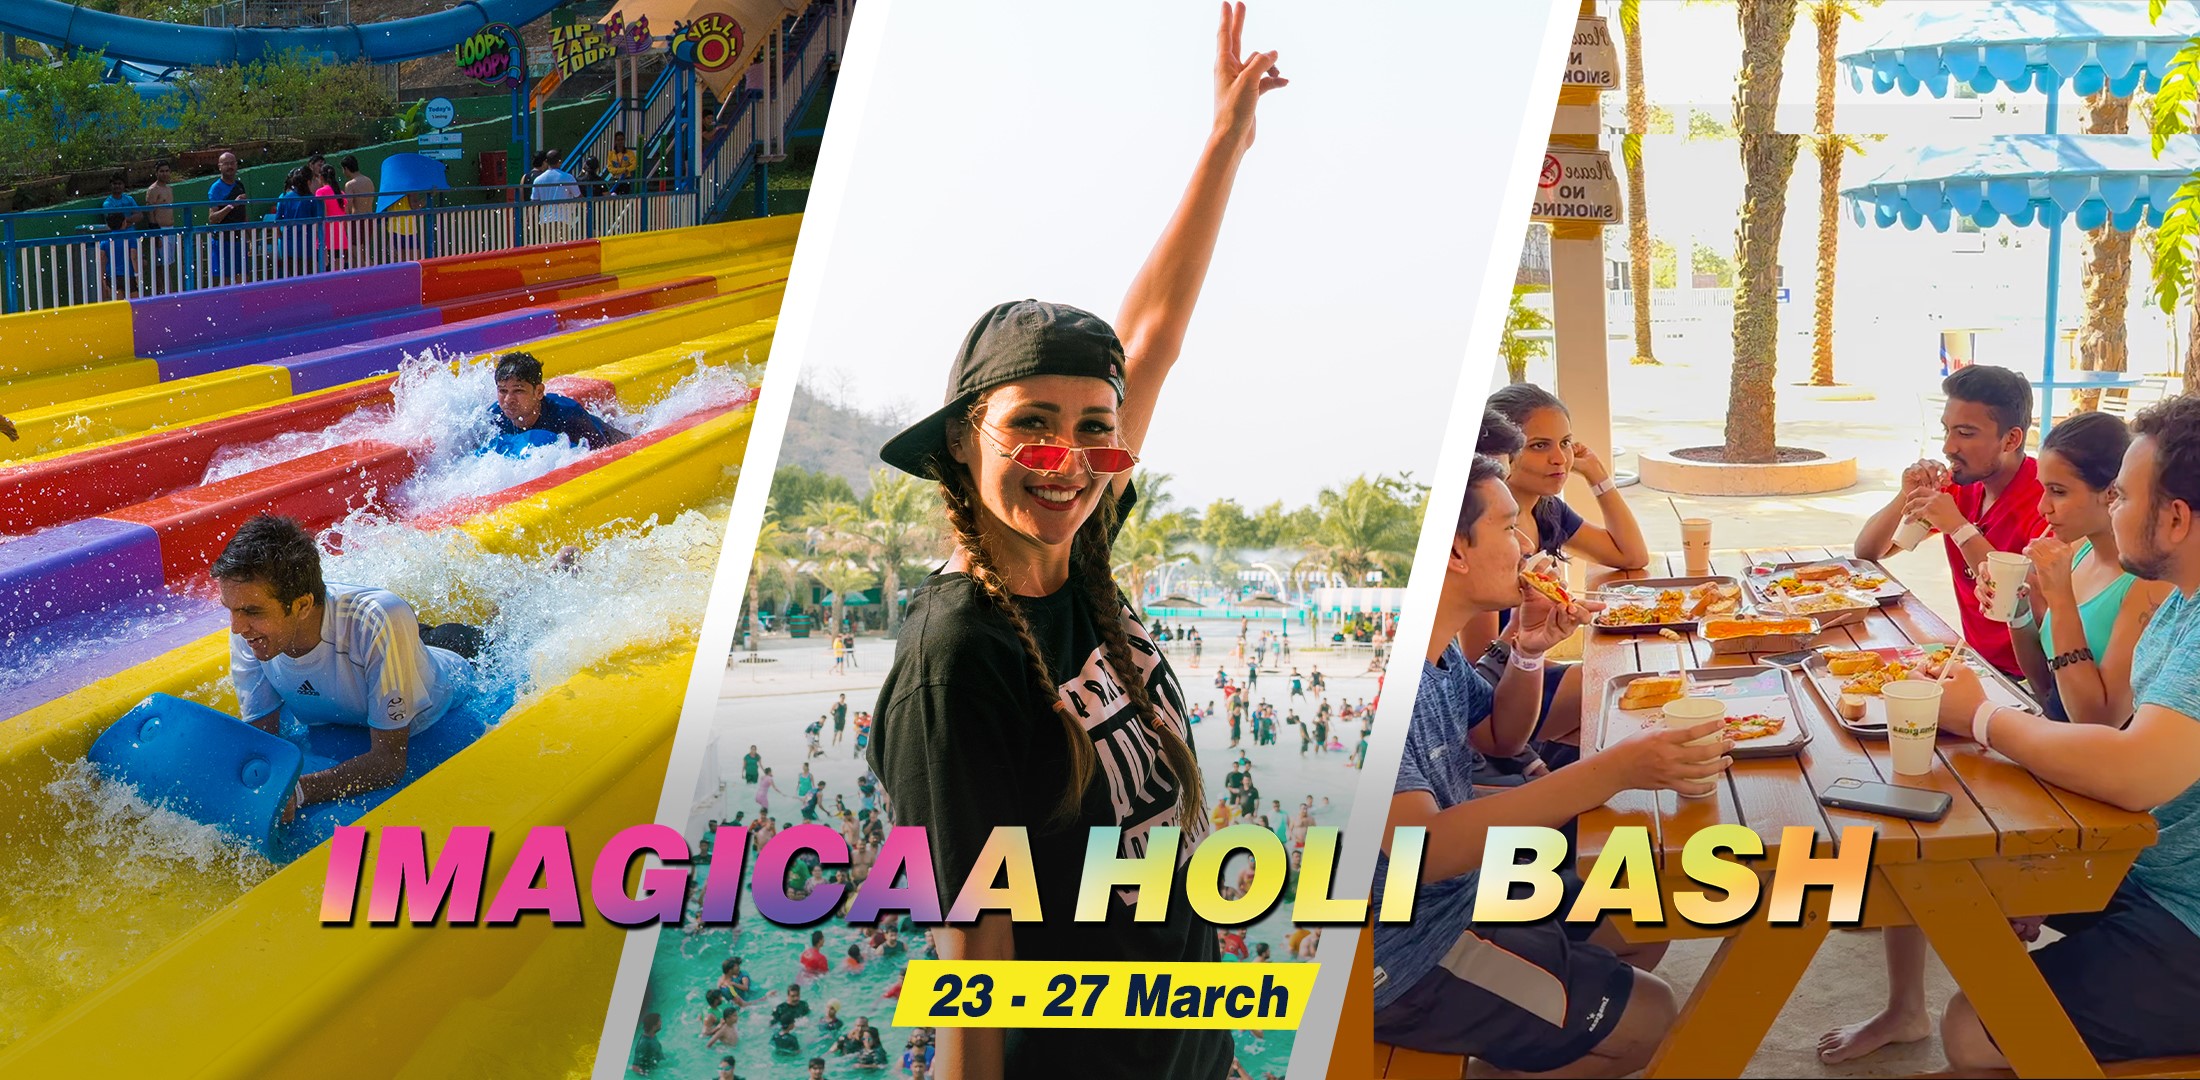 Experience the ultimate Holi bash extravaganza at Imagicaa: 5 days of non-stop fun and music